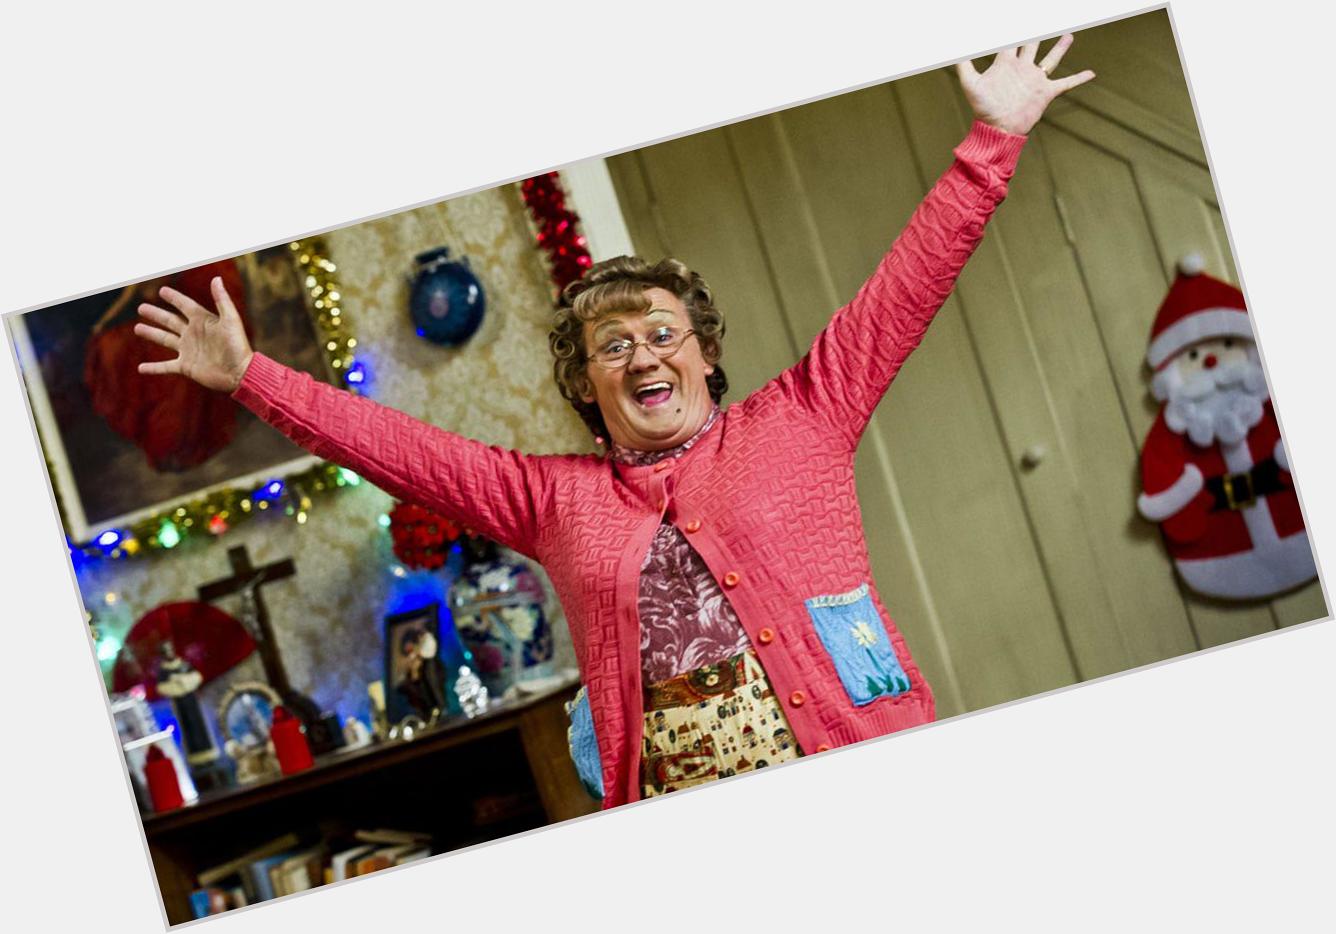 Happy fecking birthday to Brendan O\Carroll from Catch the hilarious show here 25-26 March 2016! 